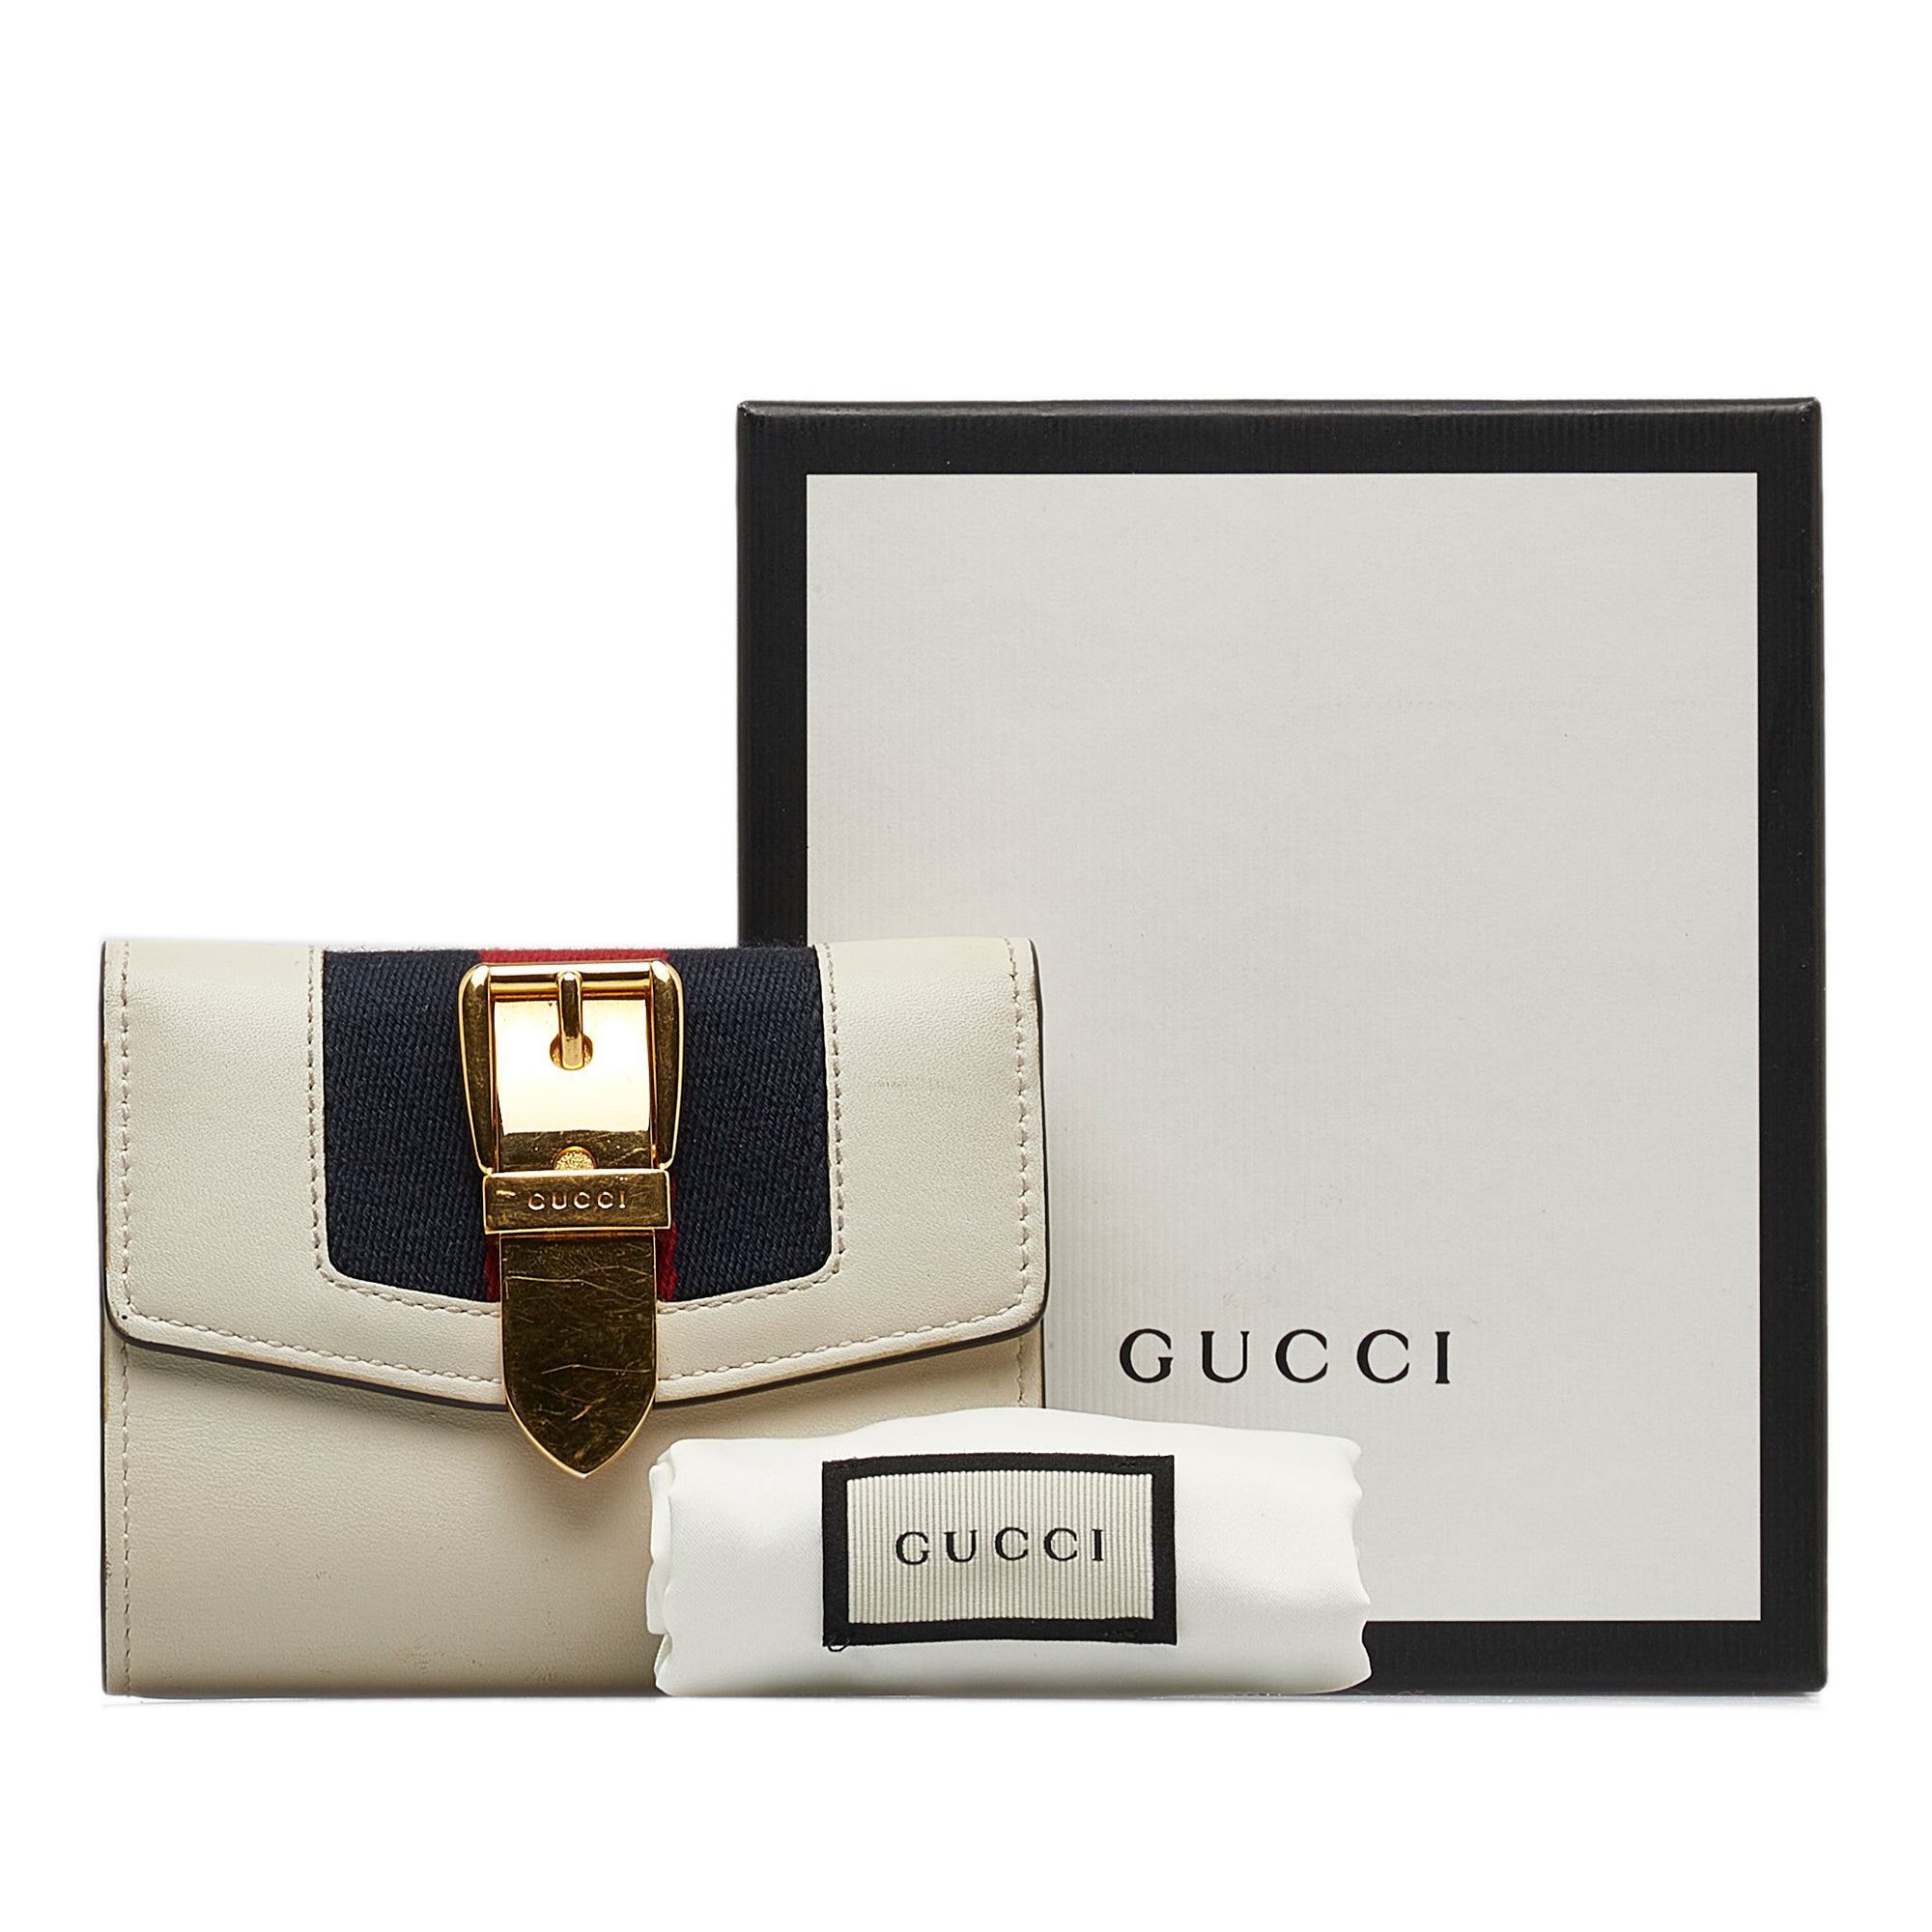 White Gucci Sylvie Leather Small Wallet - Designer Revival